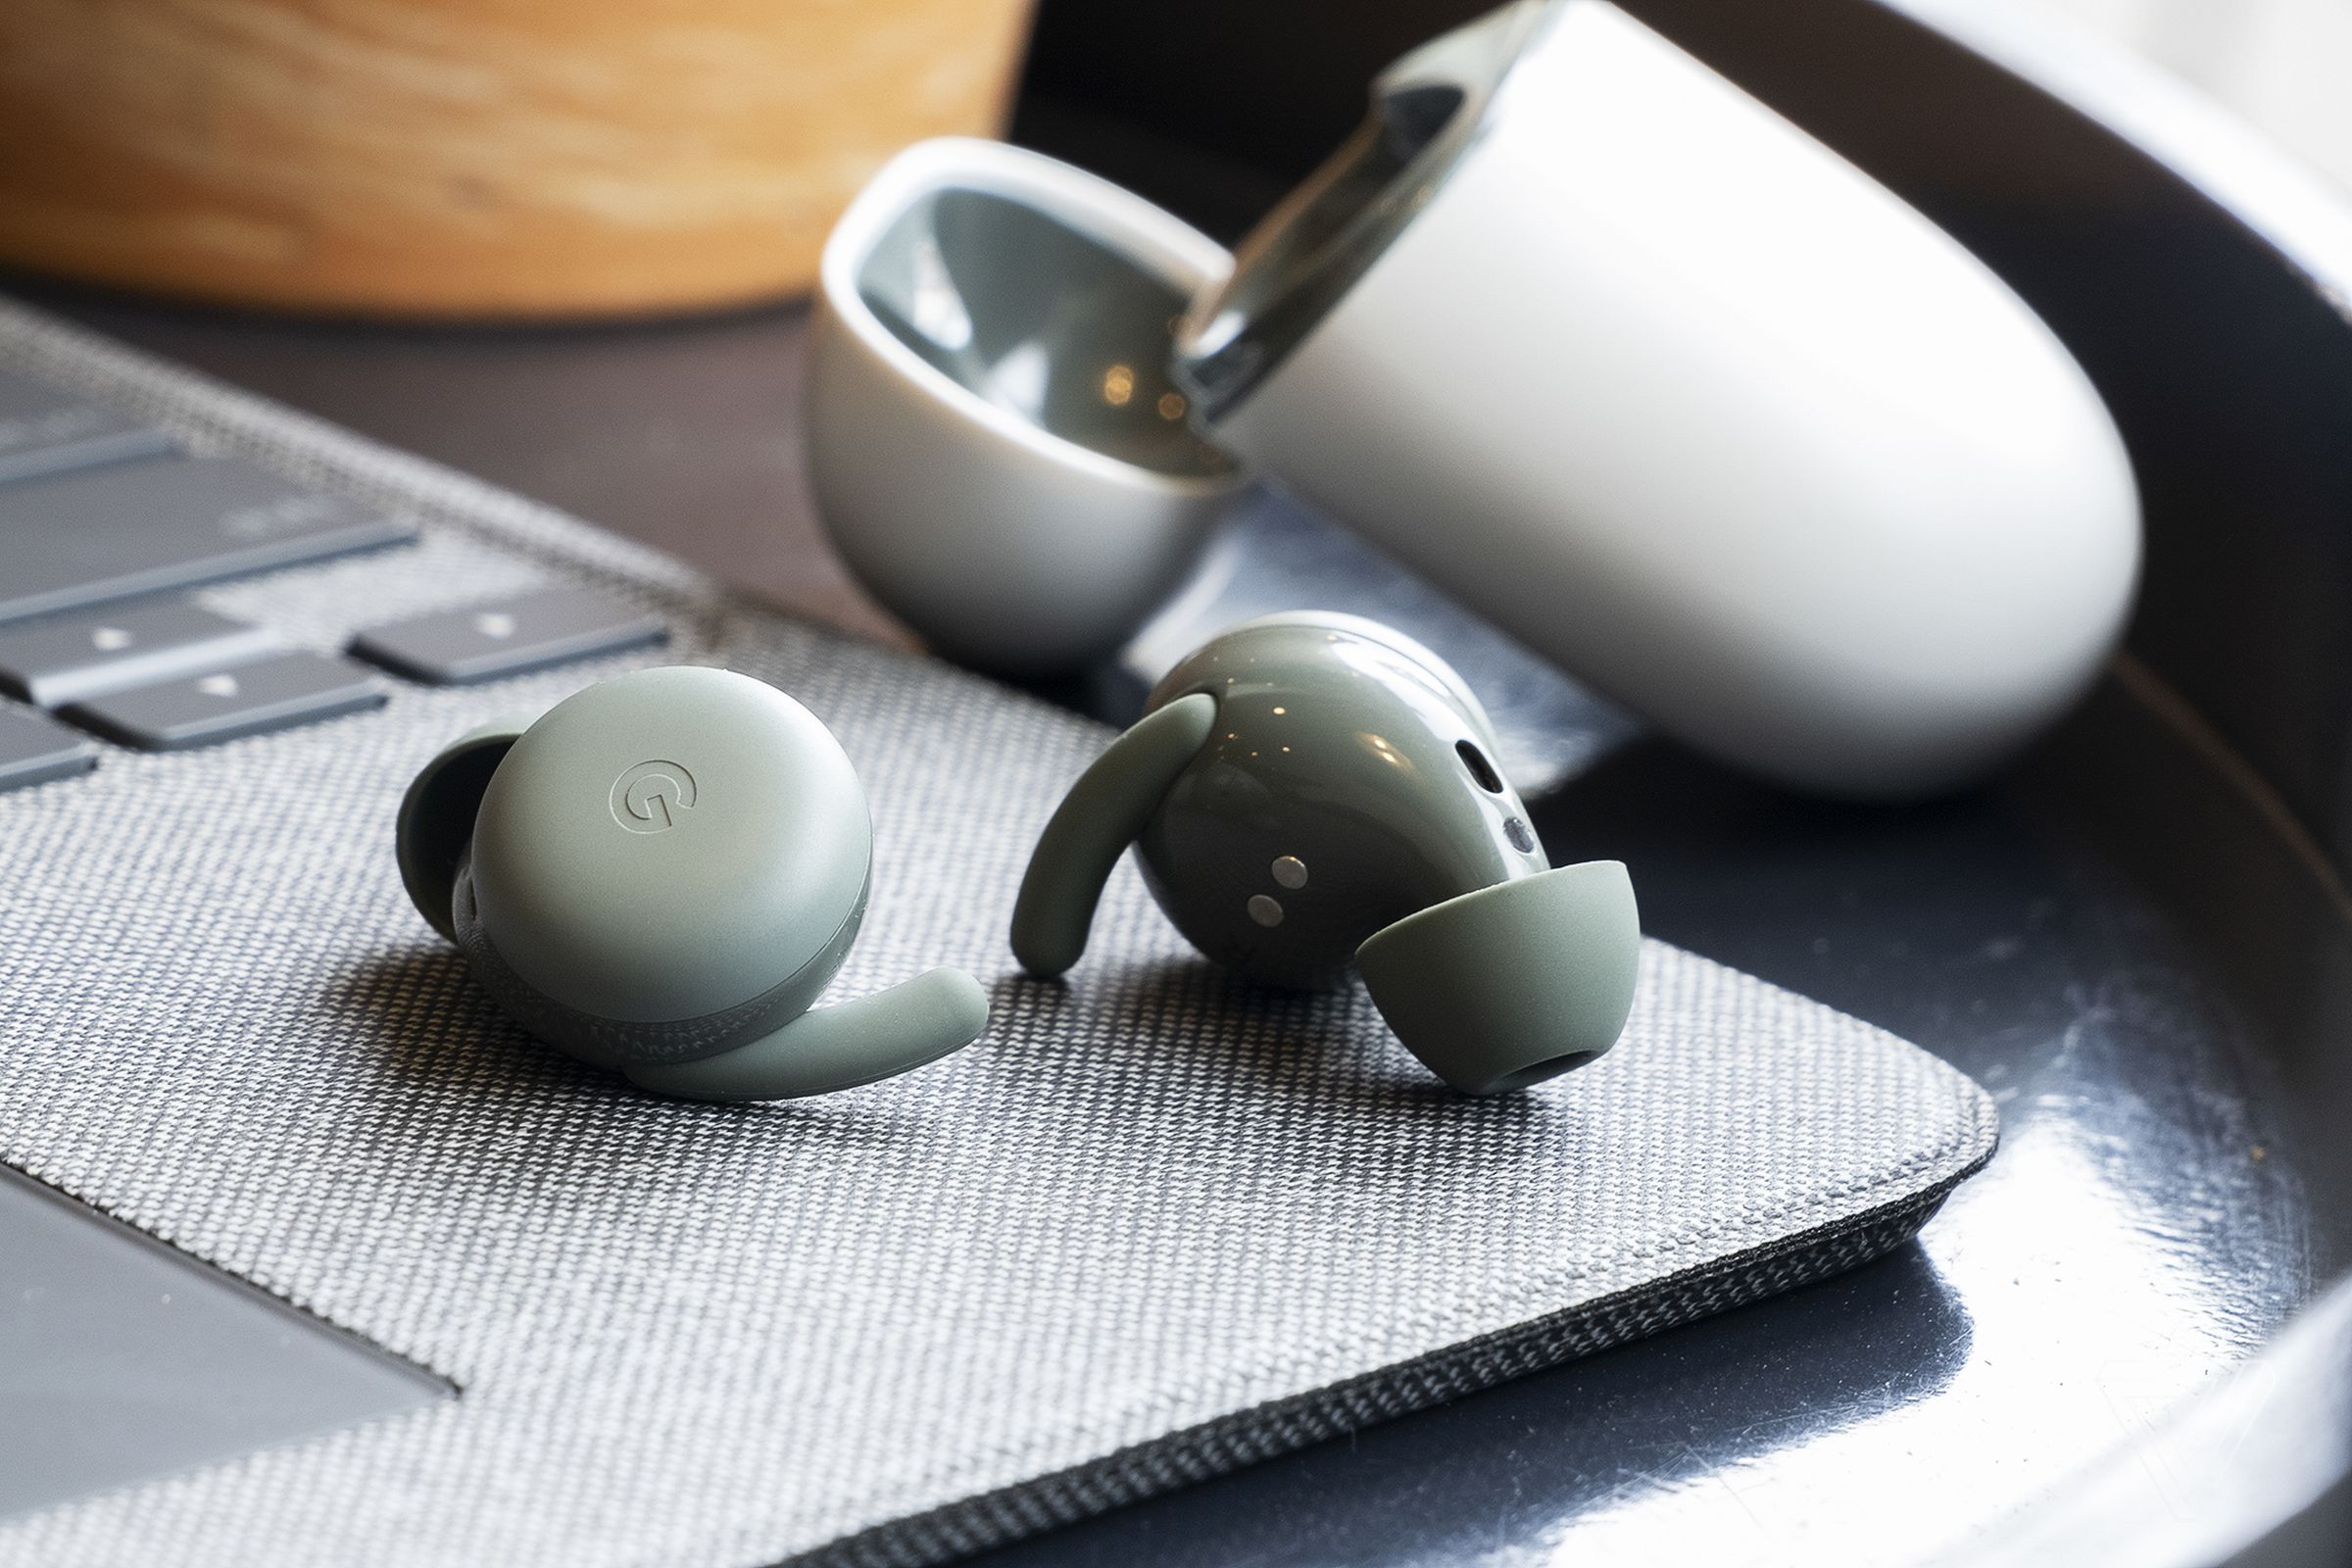 Google’s Pixel Buds A still earn the rank of the most olive earbuds around.